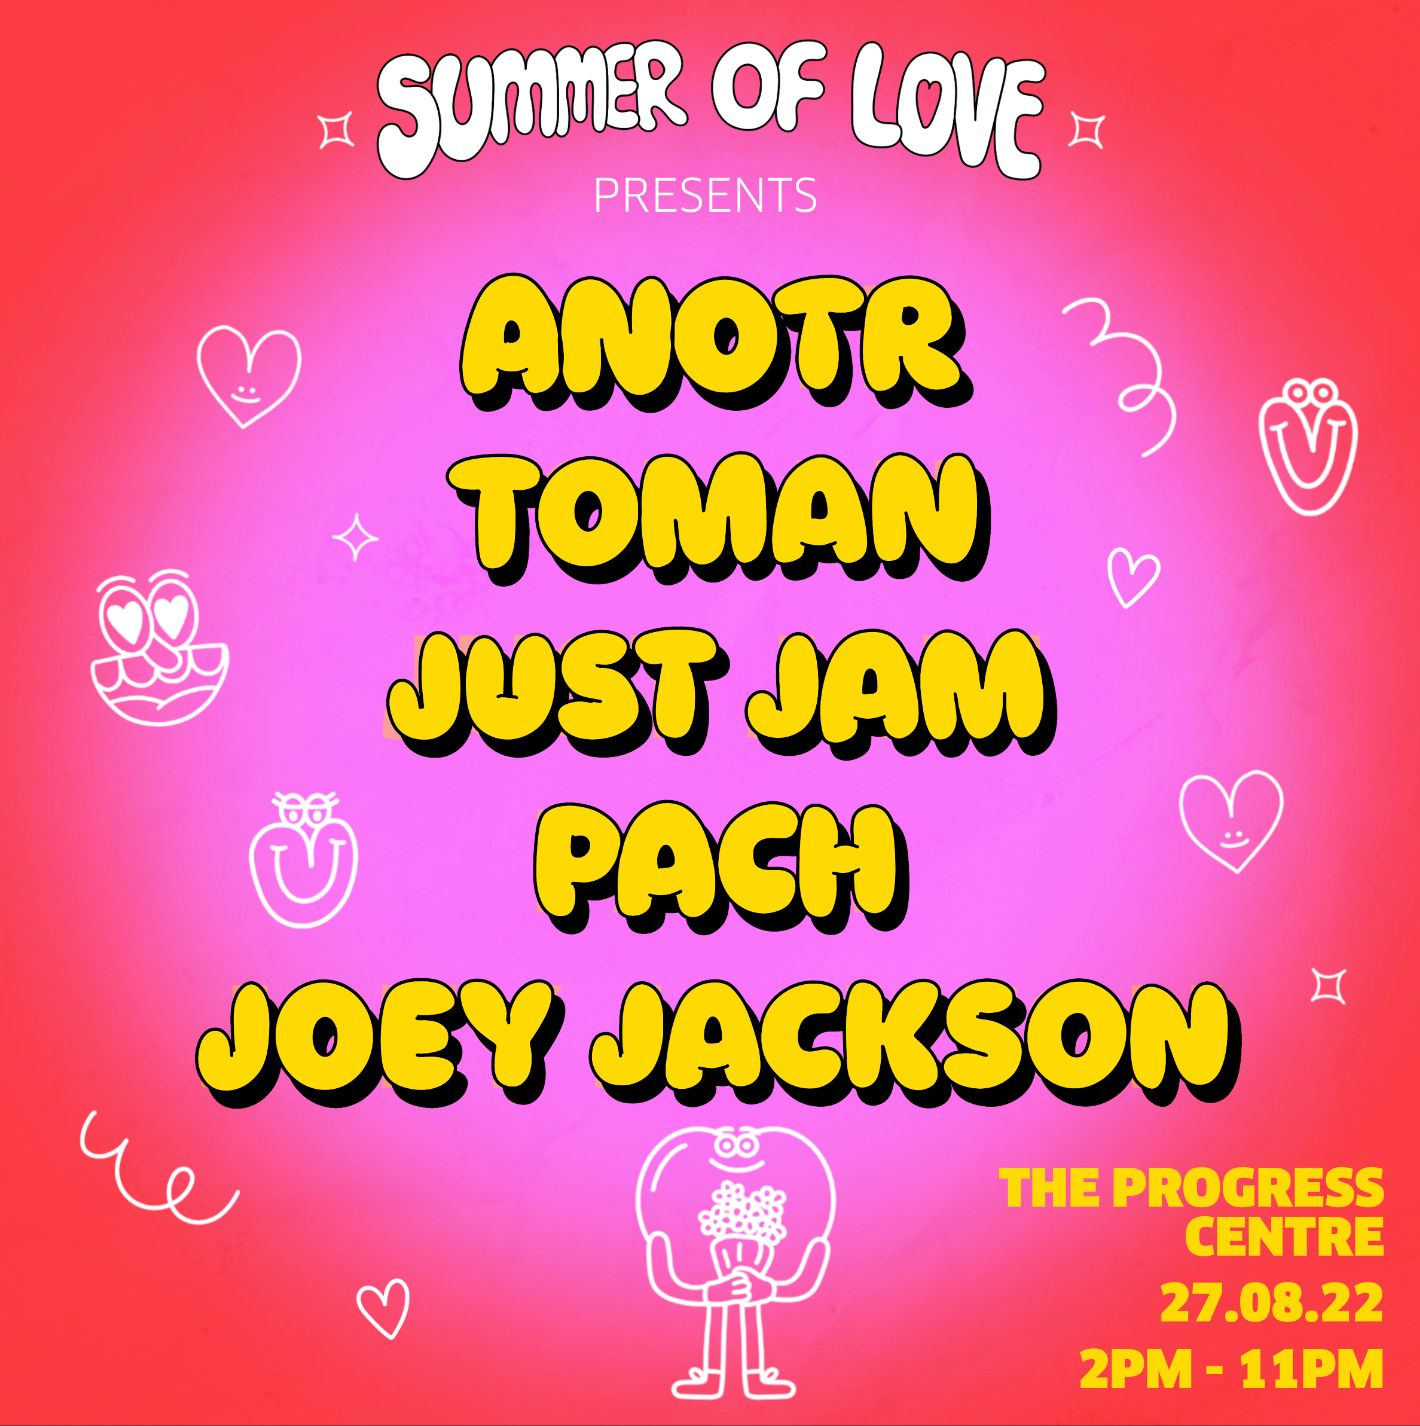 SOL presents: ANOTR, Toman, PACH, Just Jam, Joey Jackson - Flyer front